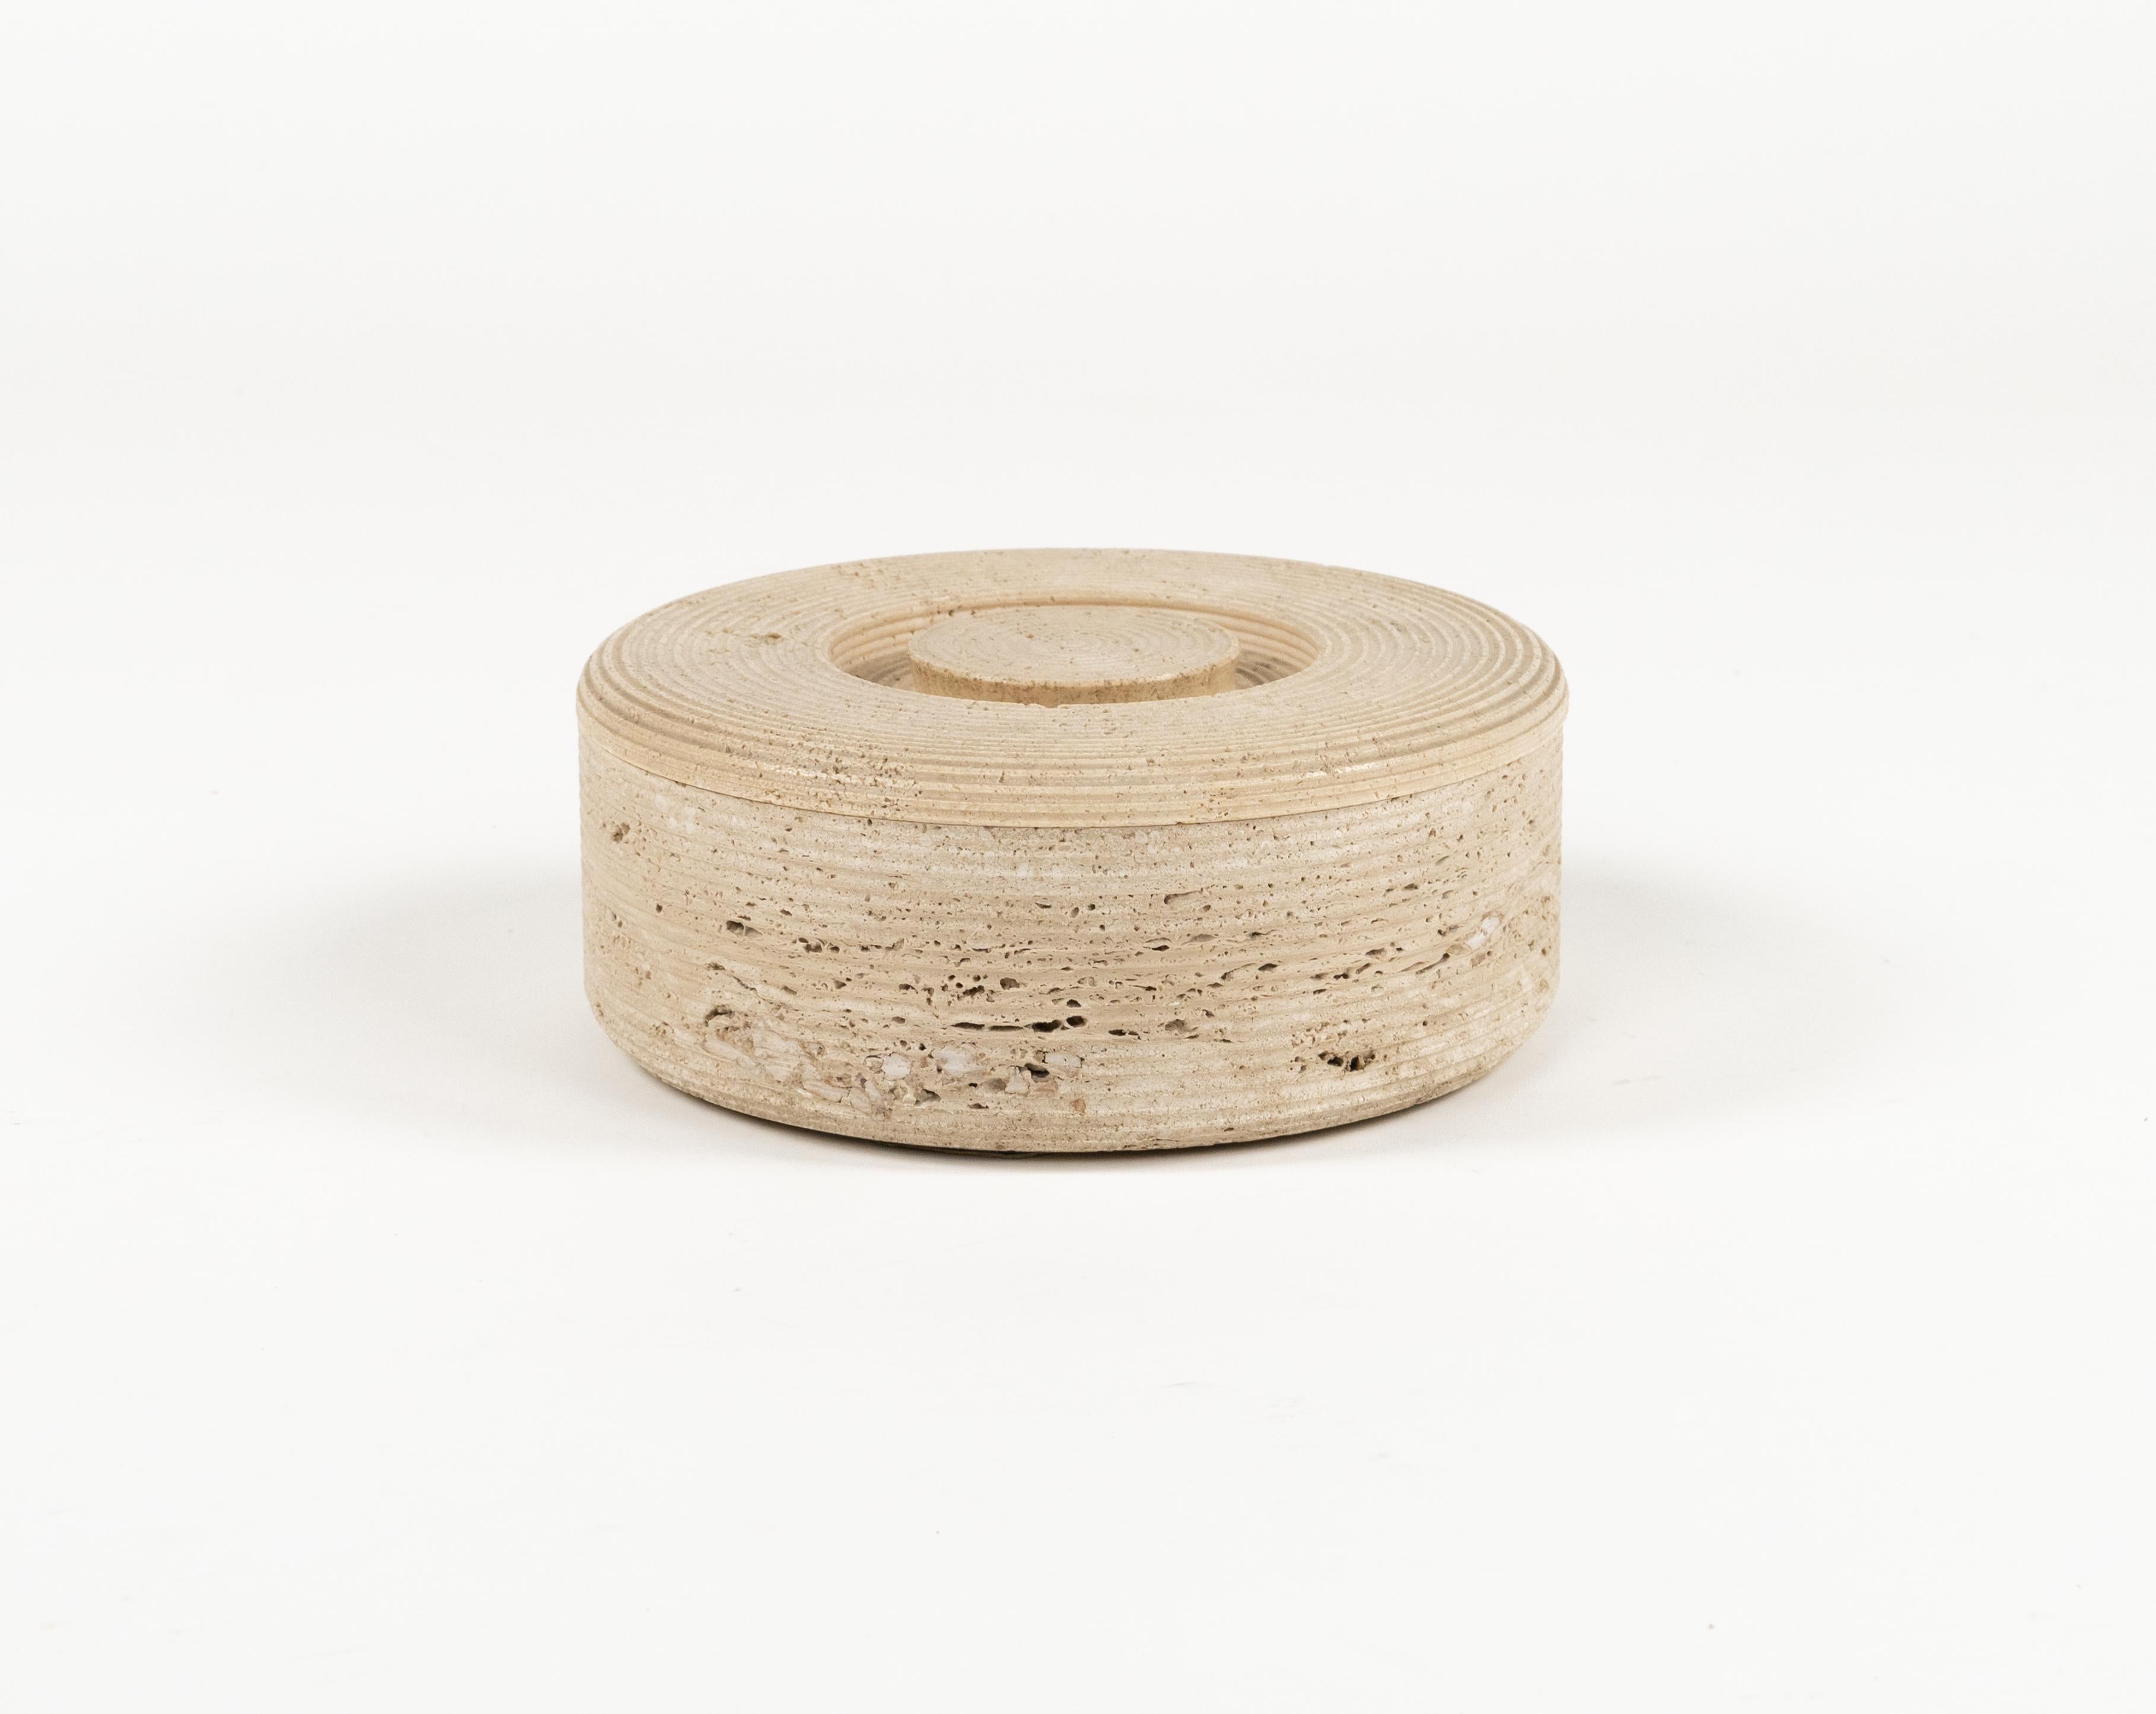 Midcentury amazing round box in travertine marble attributed to the Italian designers Pier Alessandro Giusti and Egidio Di Rosa for Up & Up. 

Made in Italy in the 1970s.